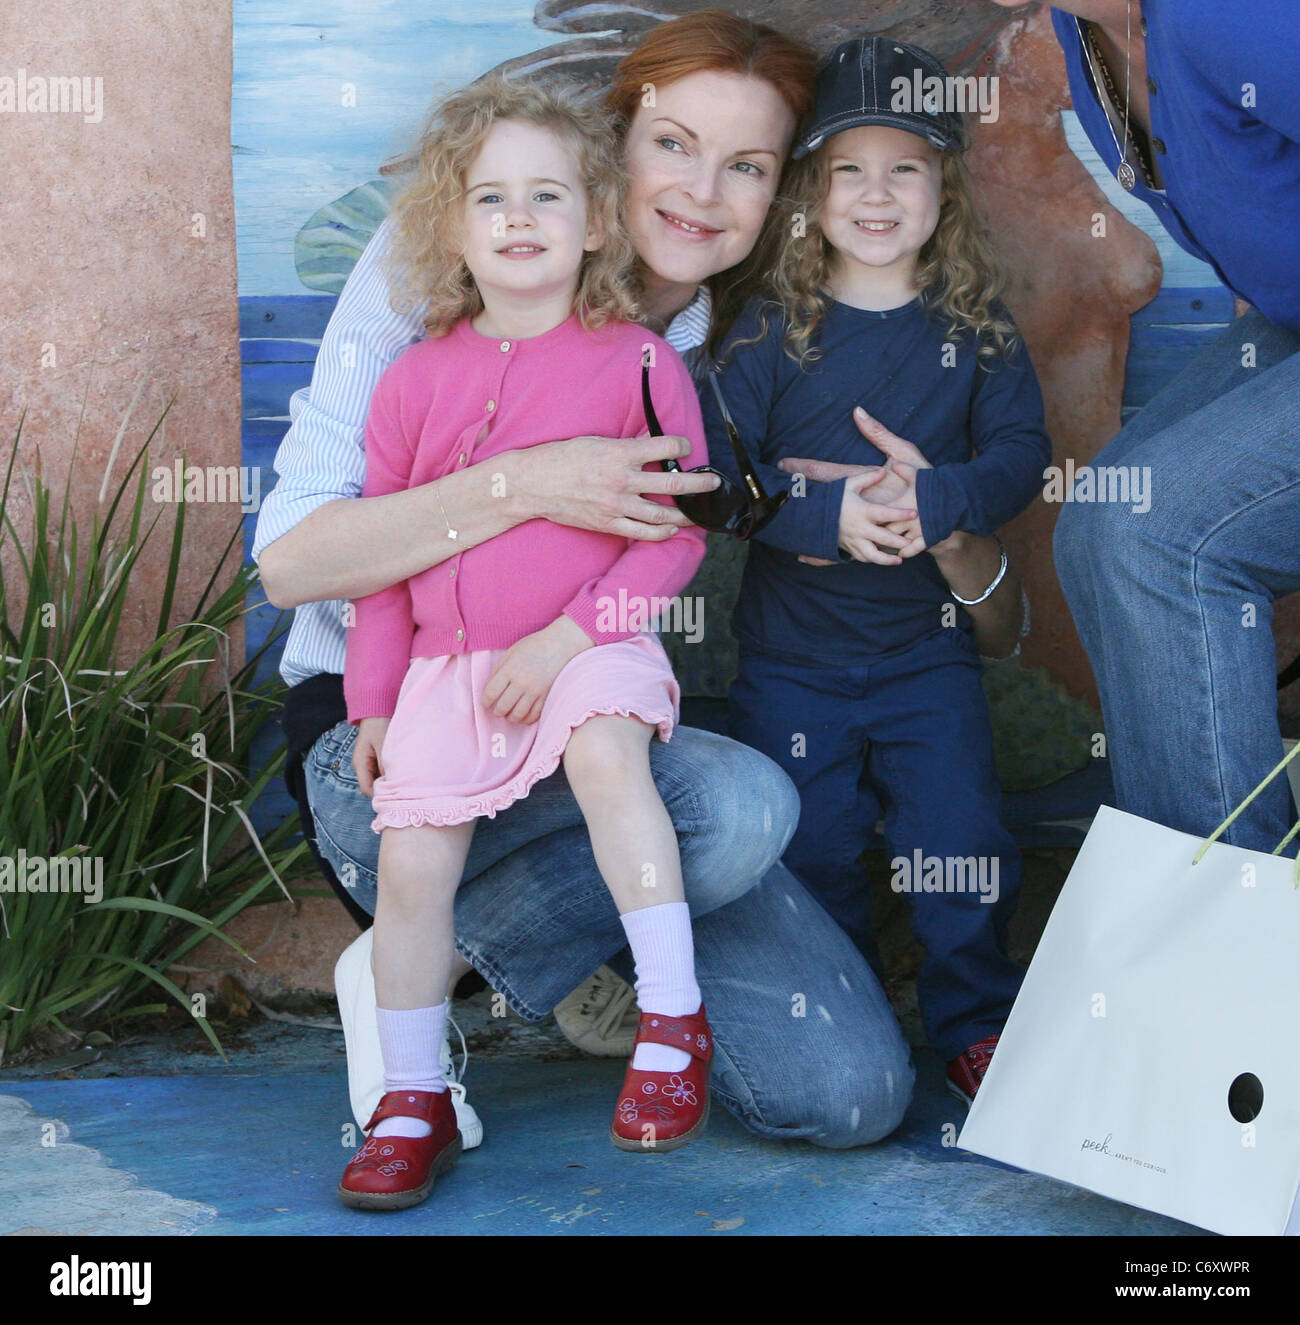 Desperate Housewives star Marcia Cross was spotted out and about in Santa Monica with her twin daughters Eden and Savannah Los Stock Photo